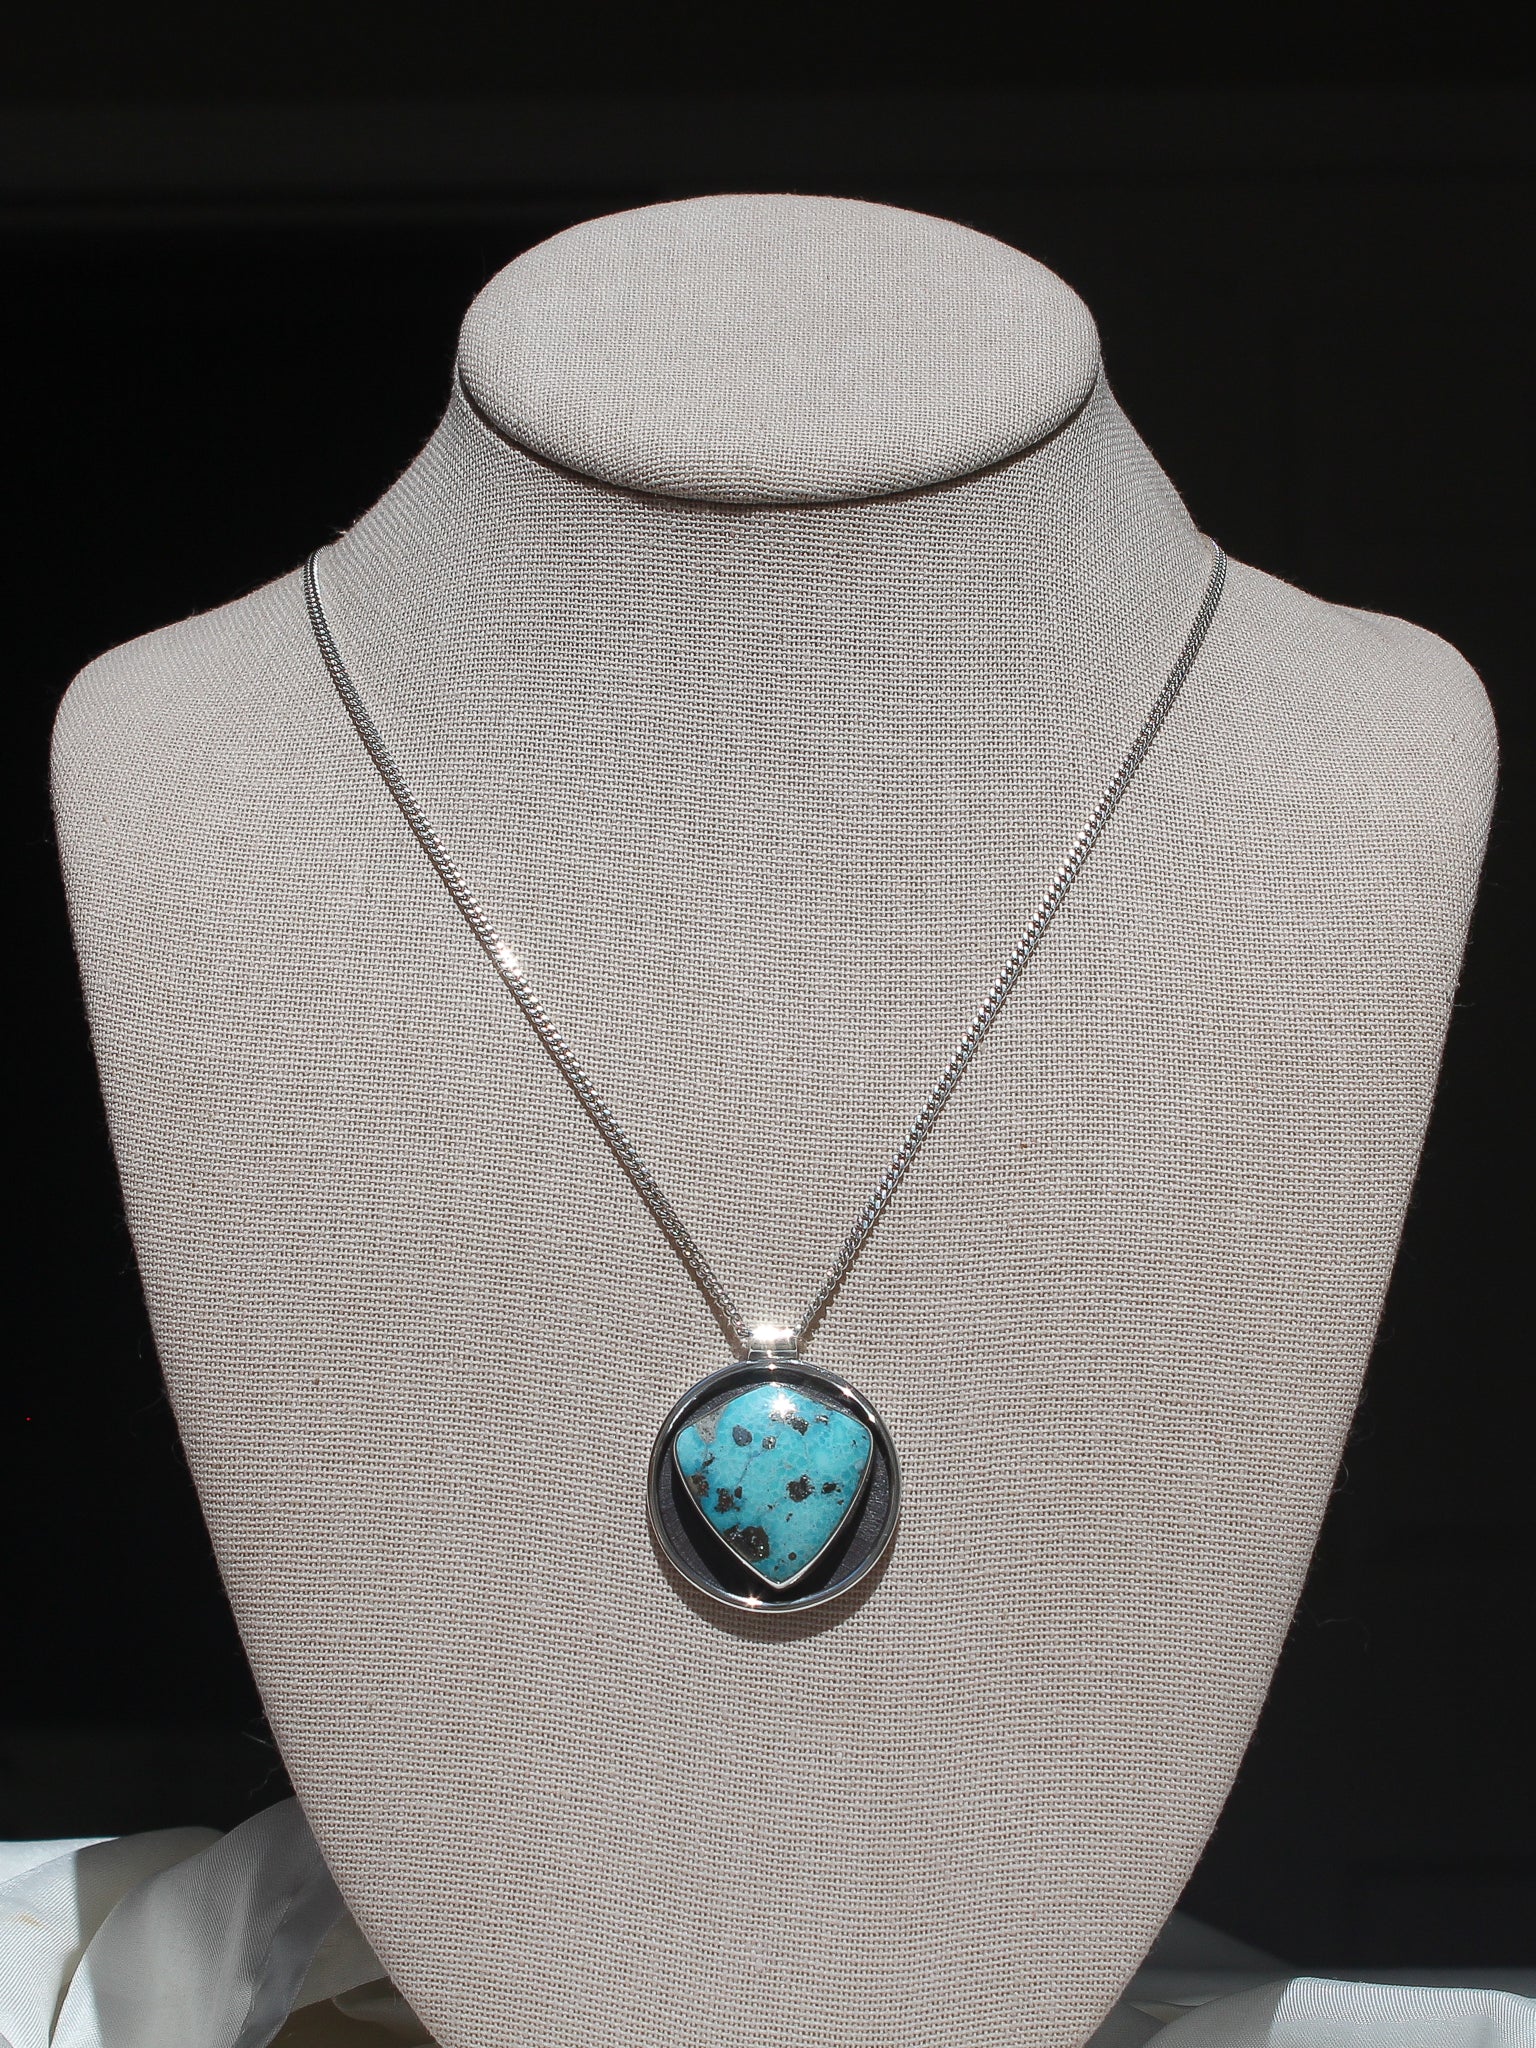 Handmade 925 sterling silver circular pendant with shield shaped white water turquoise stone with pyrite inclusions lily and William jewelry